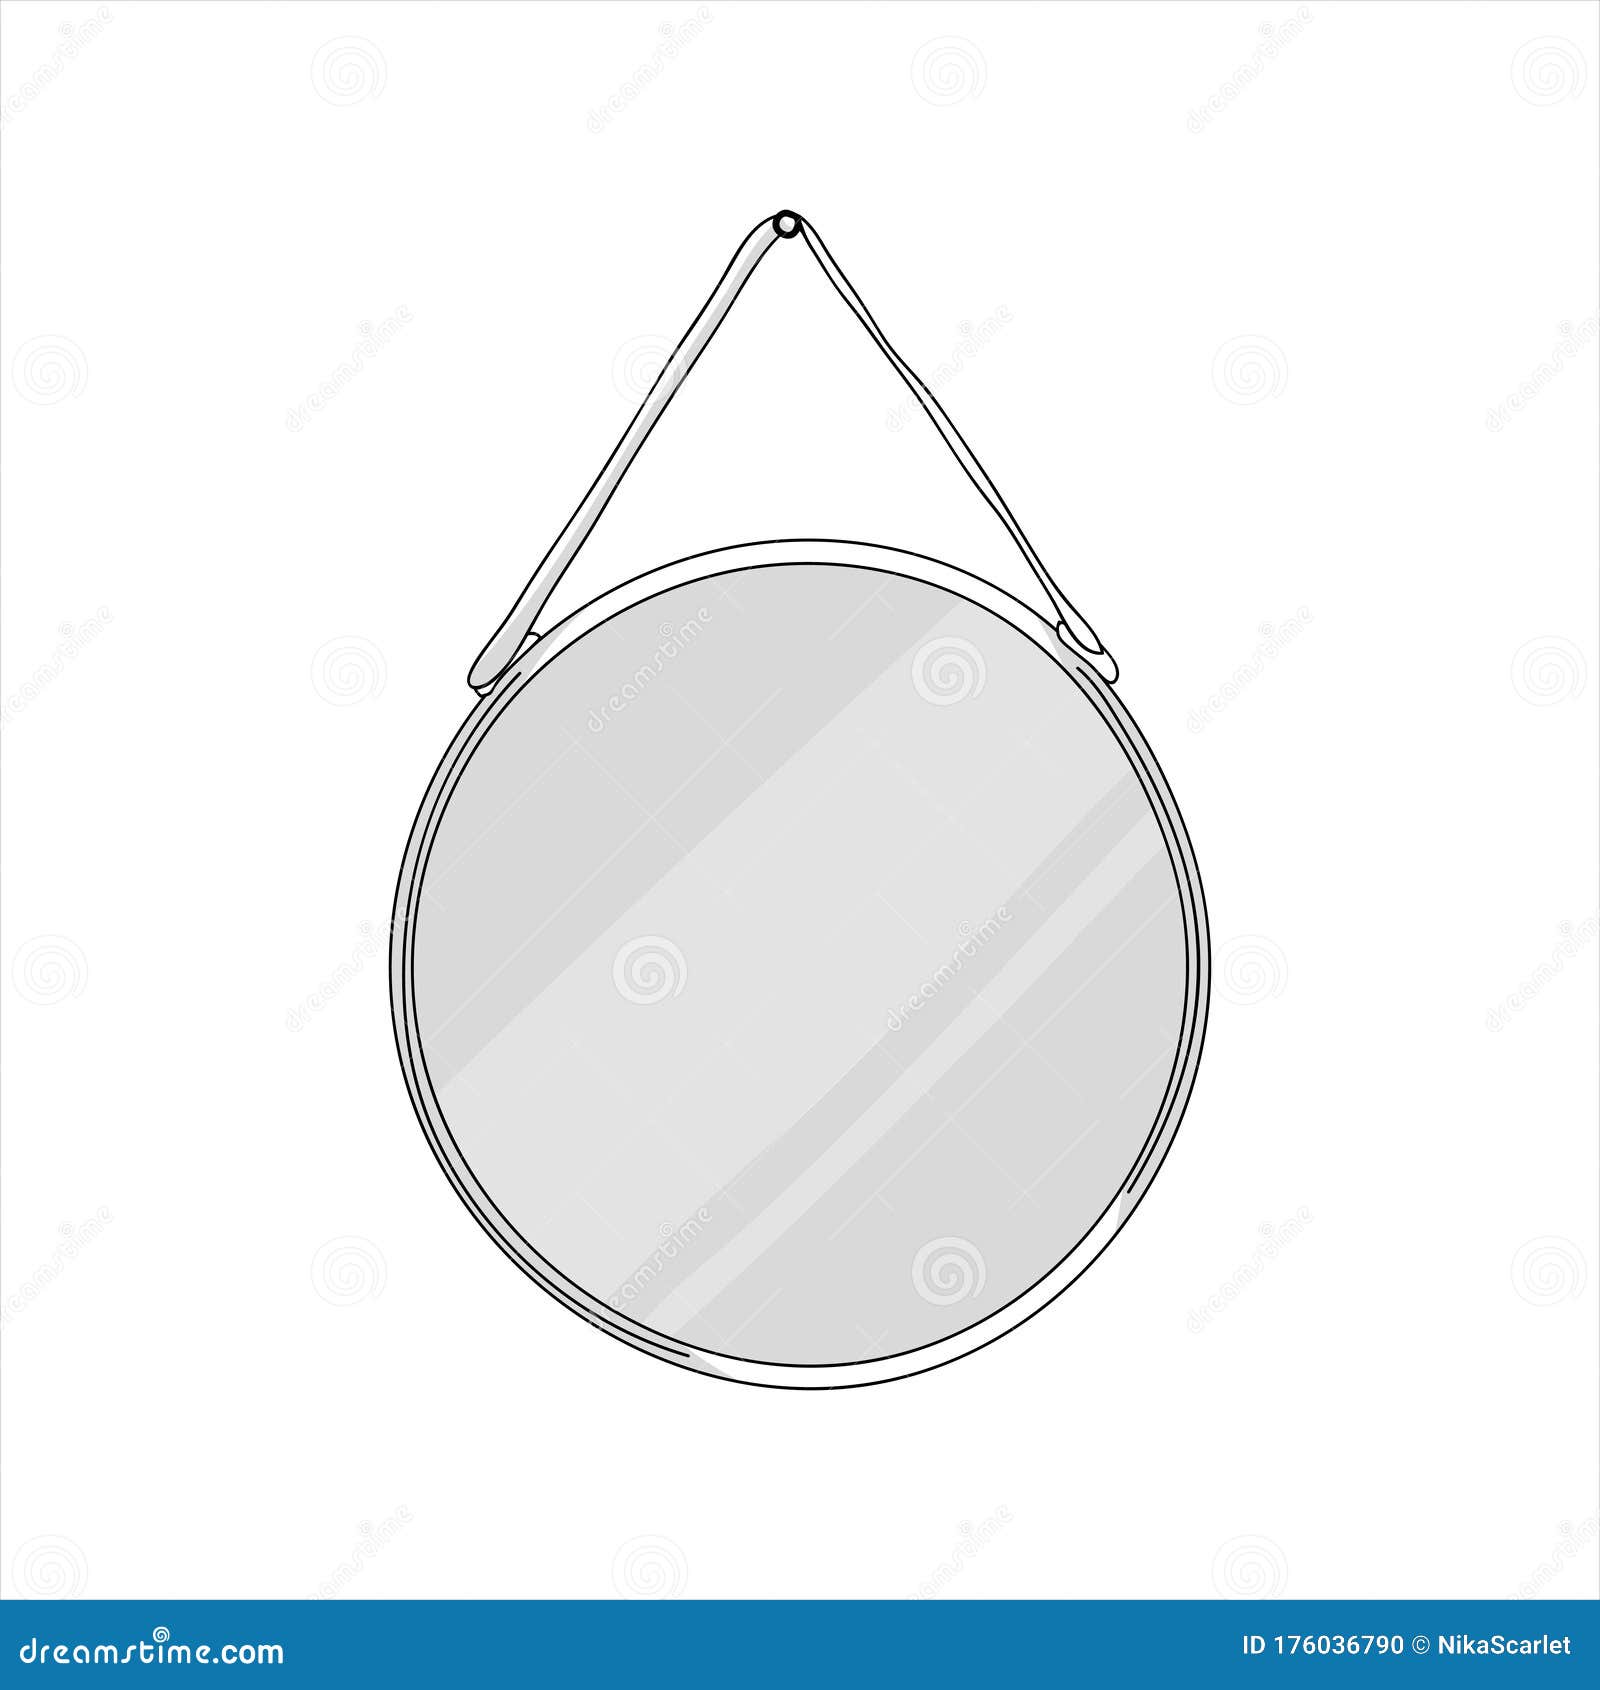 Ornate Hand Mirror Coloring Pages - Mirror Coloring Pages - Coloring Pages  For Kids And Adults